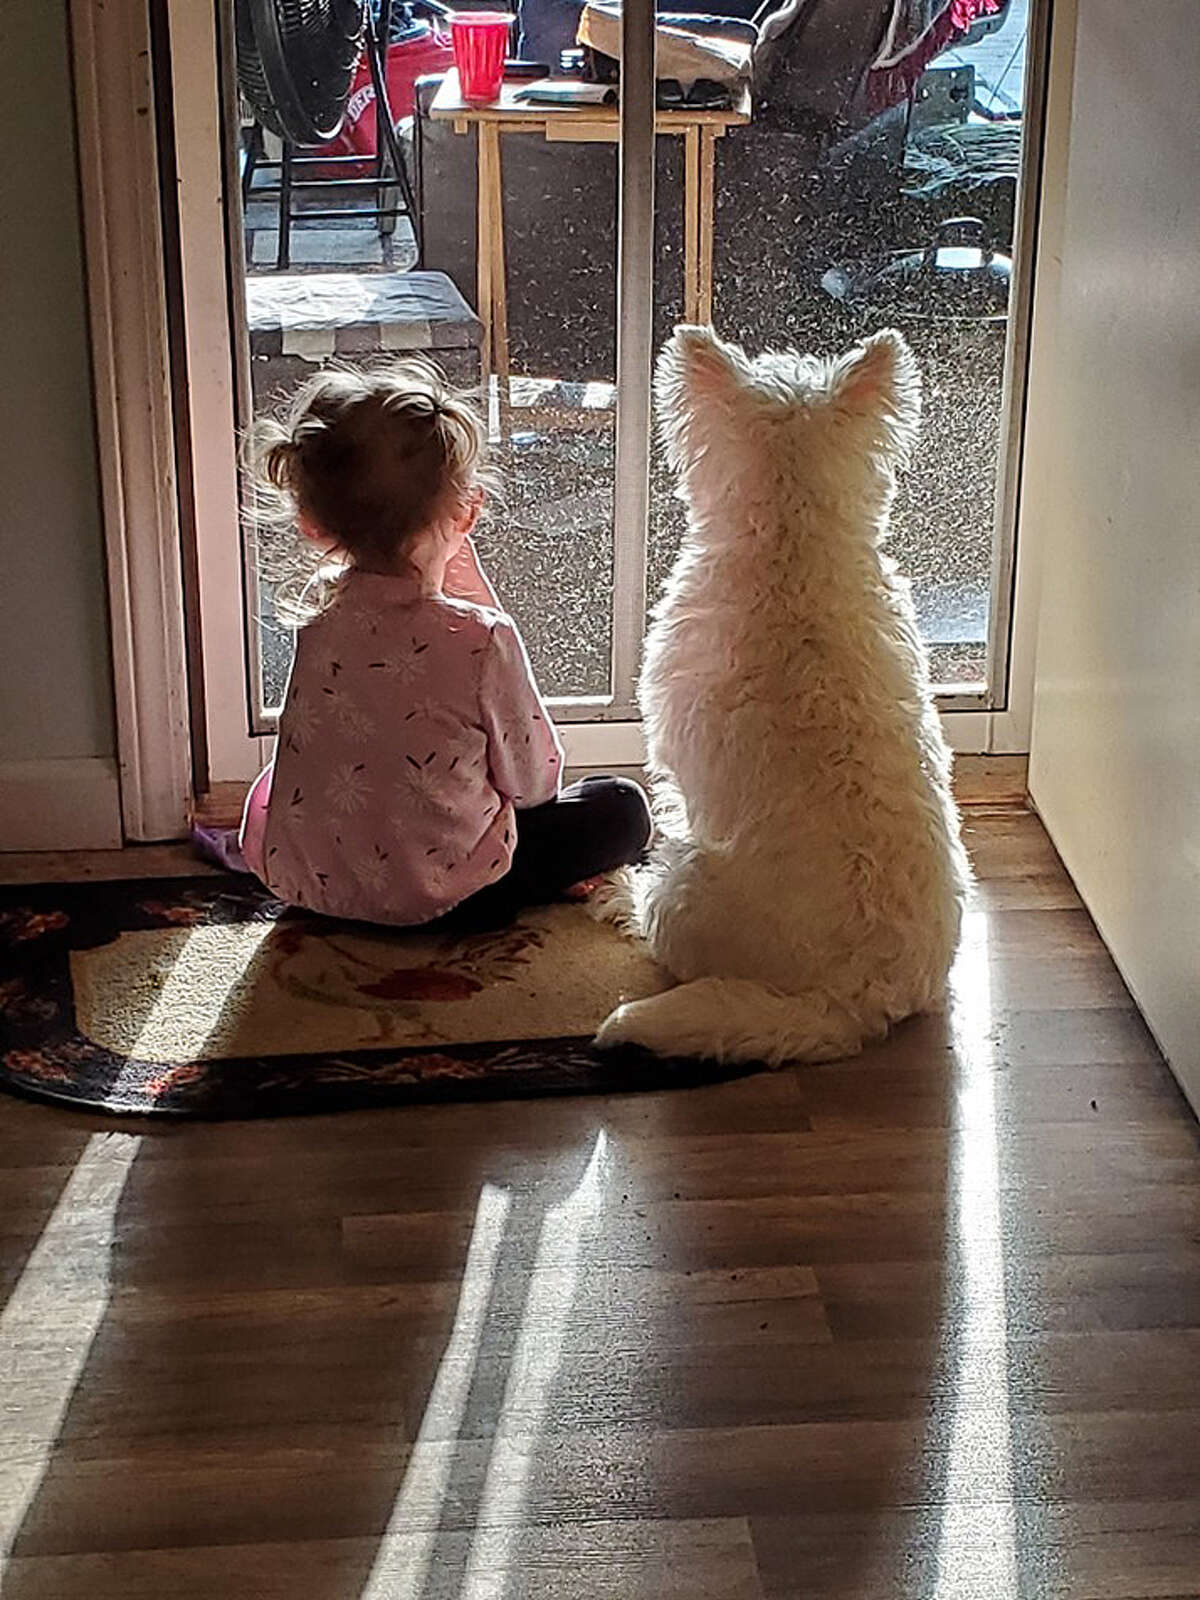 A pup and child watch things going on outside.